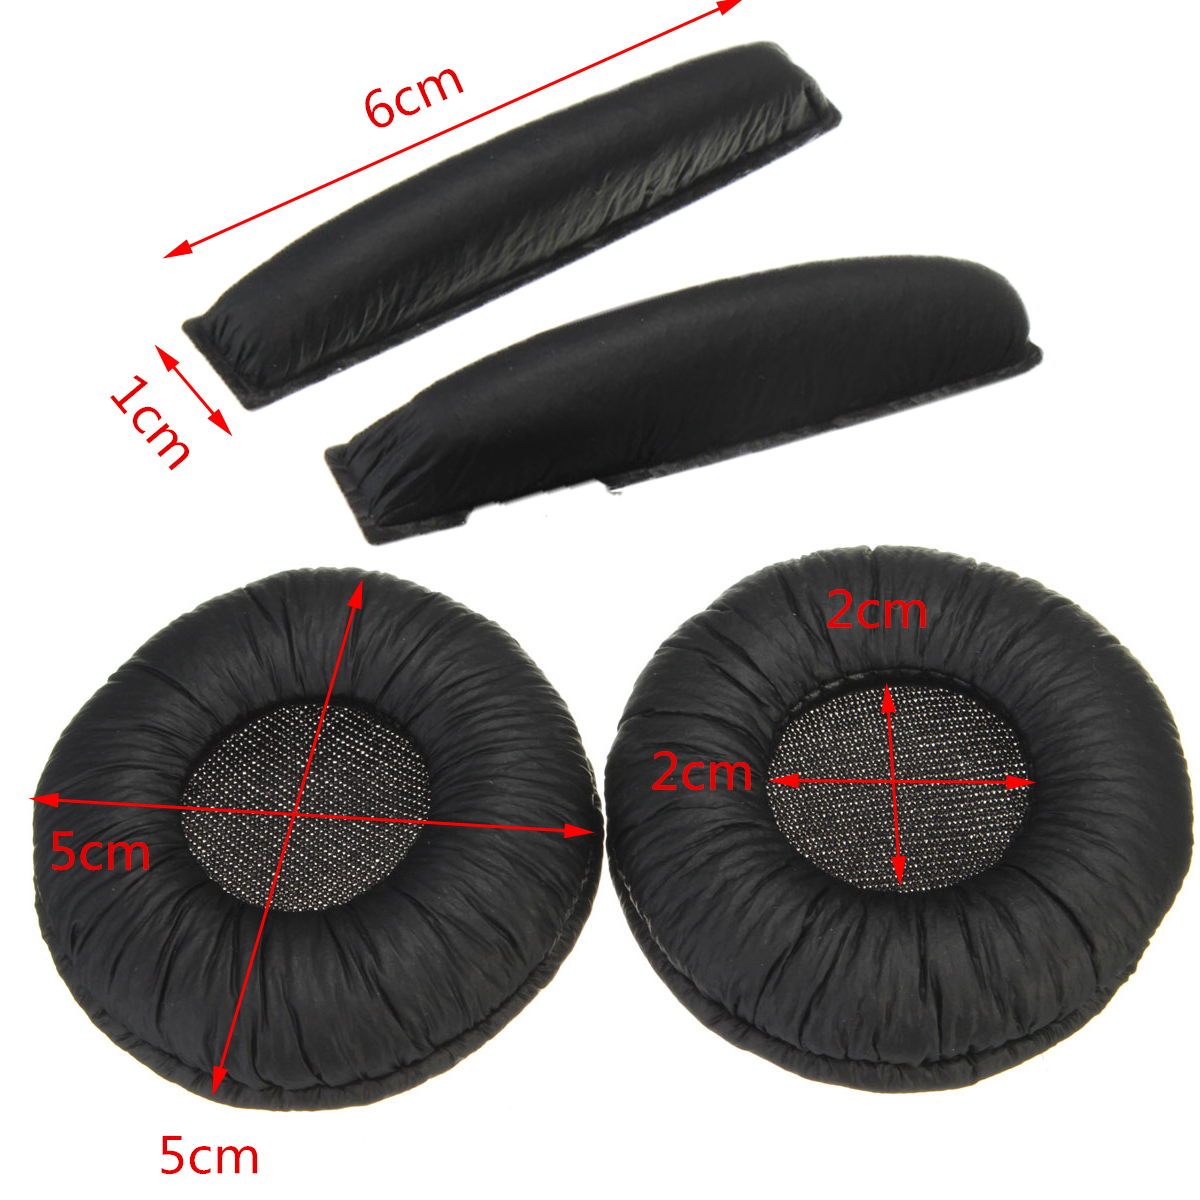 LEORY-1-Pair-For-Sennheiser-PX100-PX200-Headphone-Replacement-Ear-Pads-Cover-Headband-Cushion-1782024-4